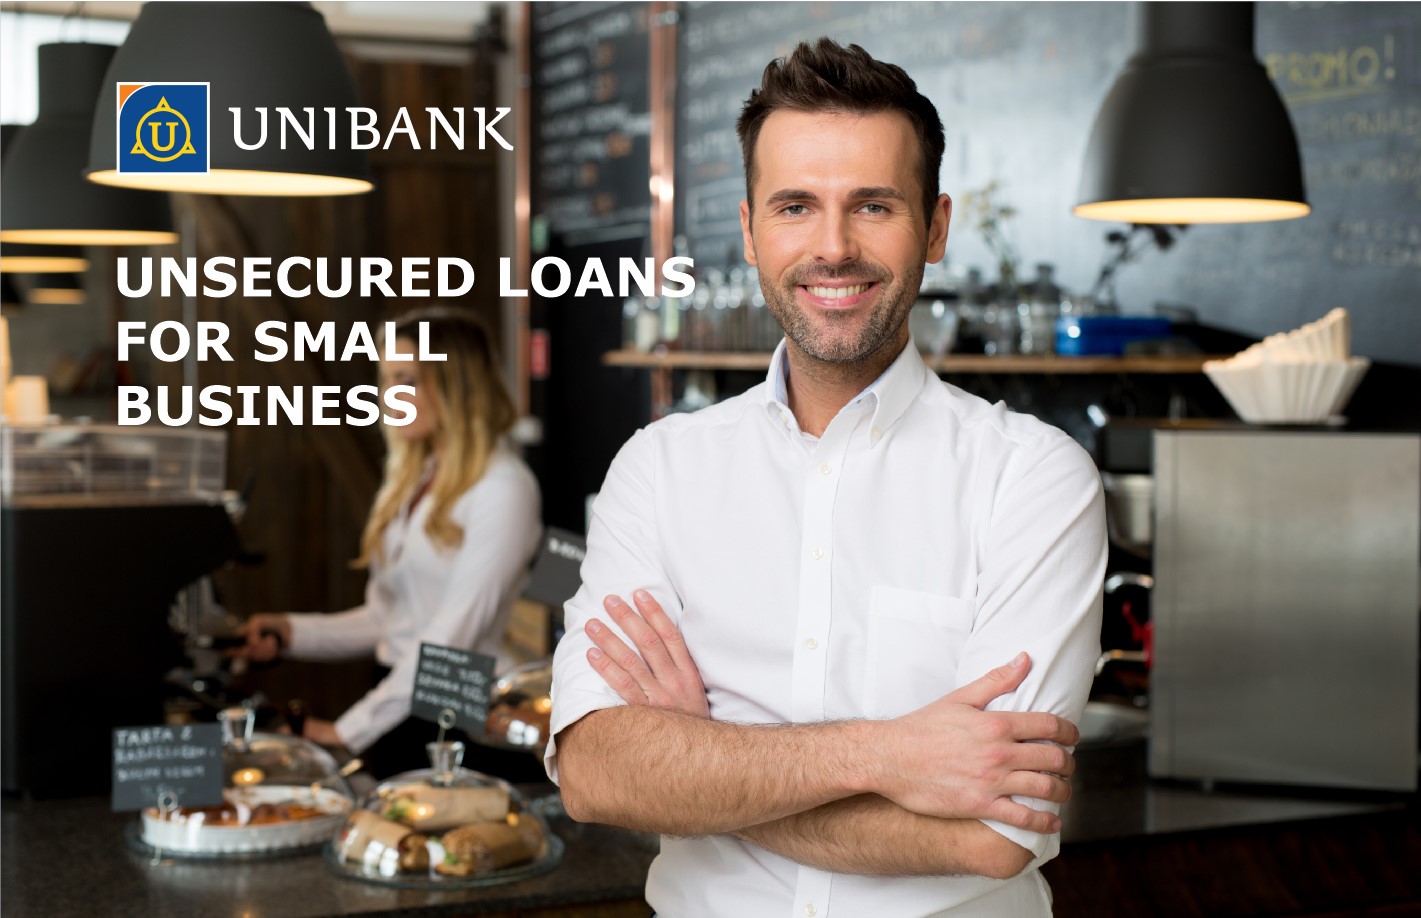 Unibank has decreased interest rates of unsecured business loans